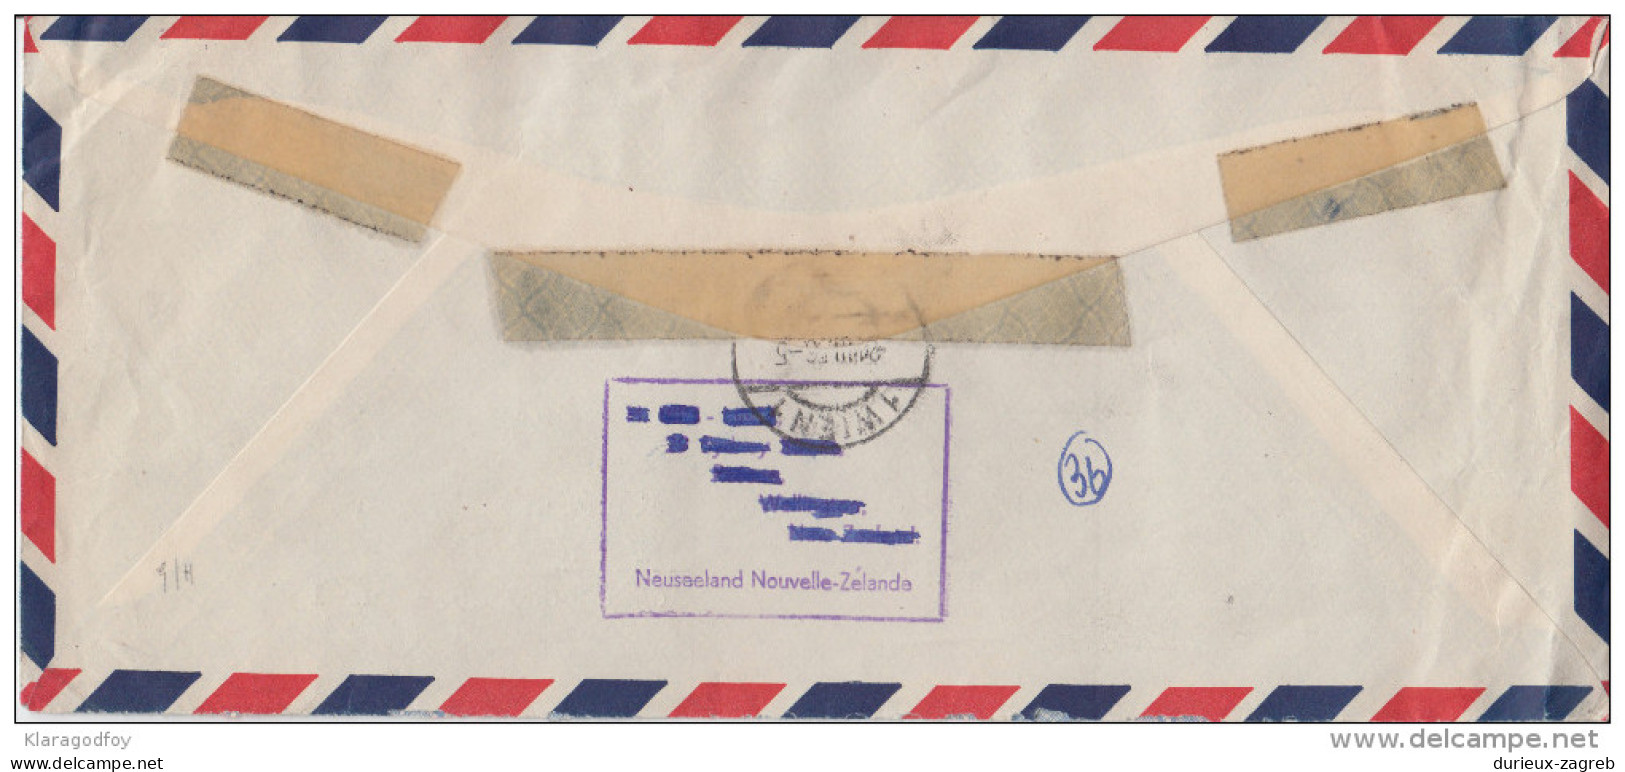 New Zealand Nice Air Mail Letter Cover Travelled To Austria 1956 B160711 - Briefe U. Dokumente